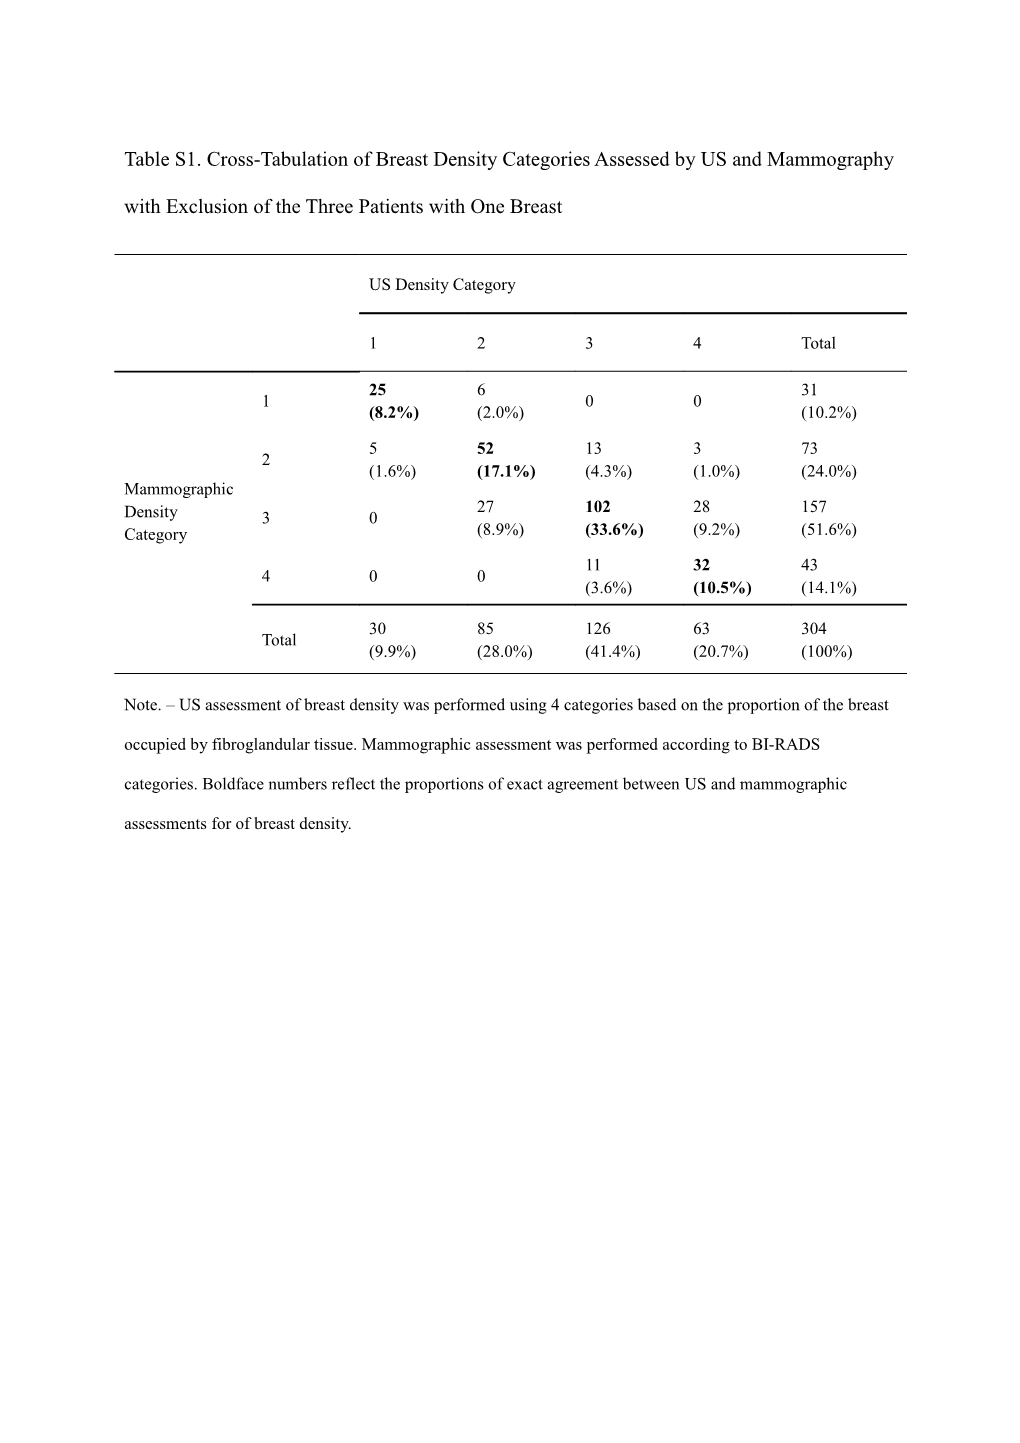 Table S1. Cross-Tabulation of Breast Density Categories Assessed by US and Mammography